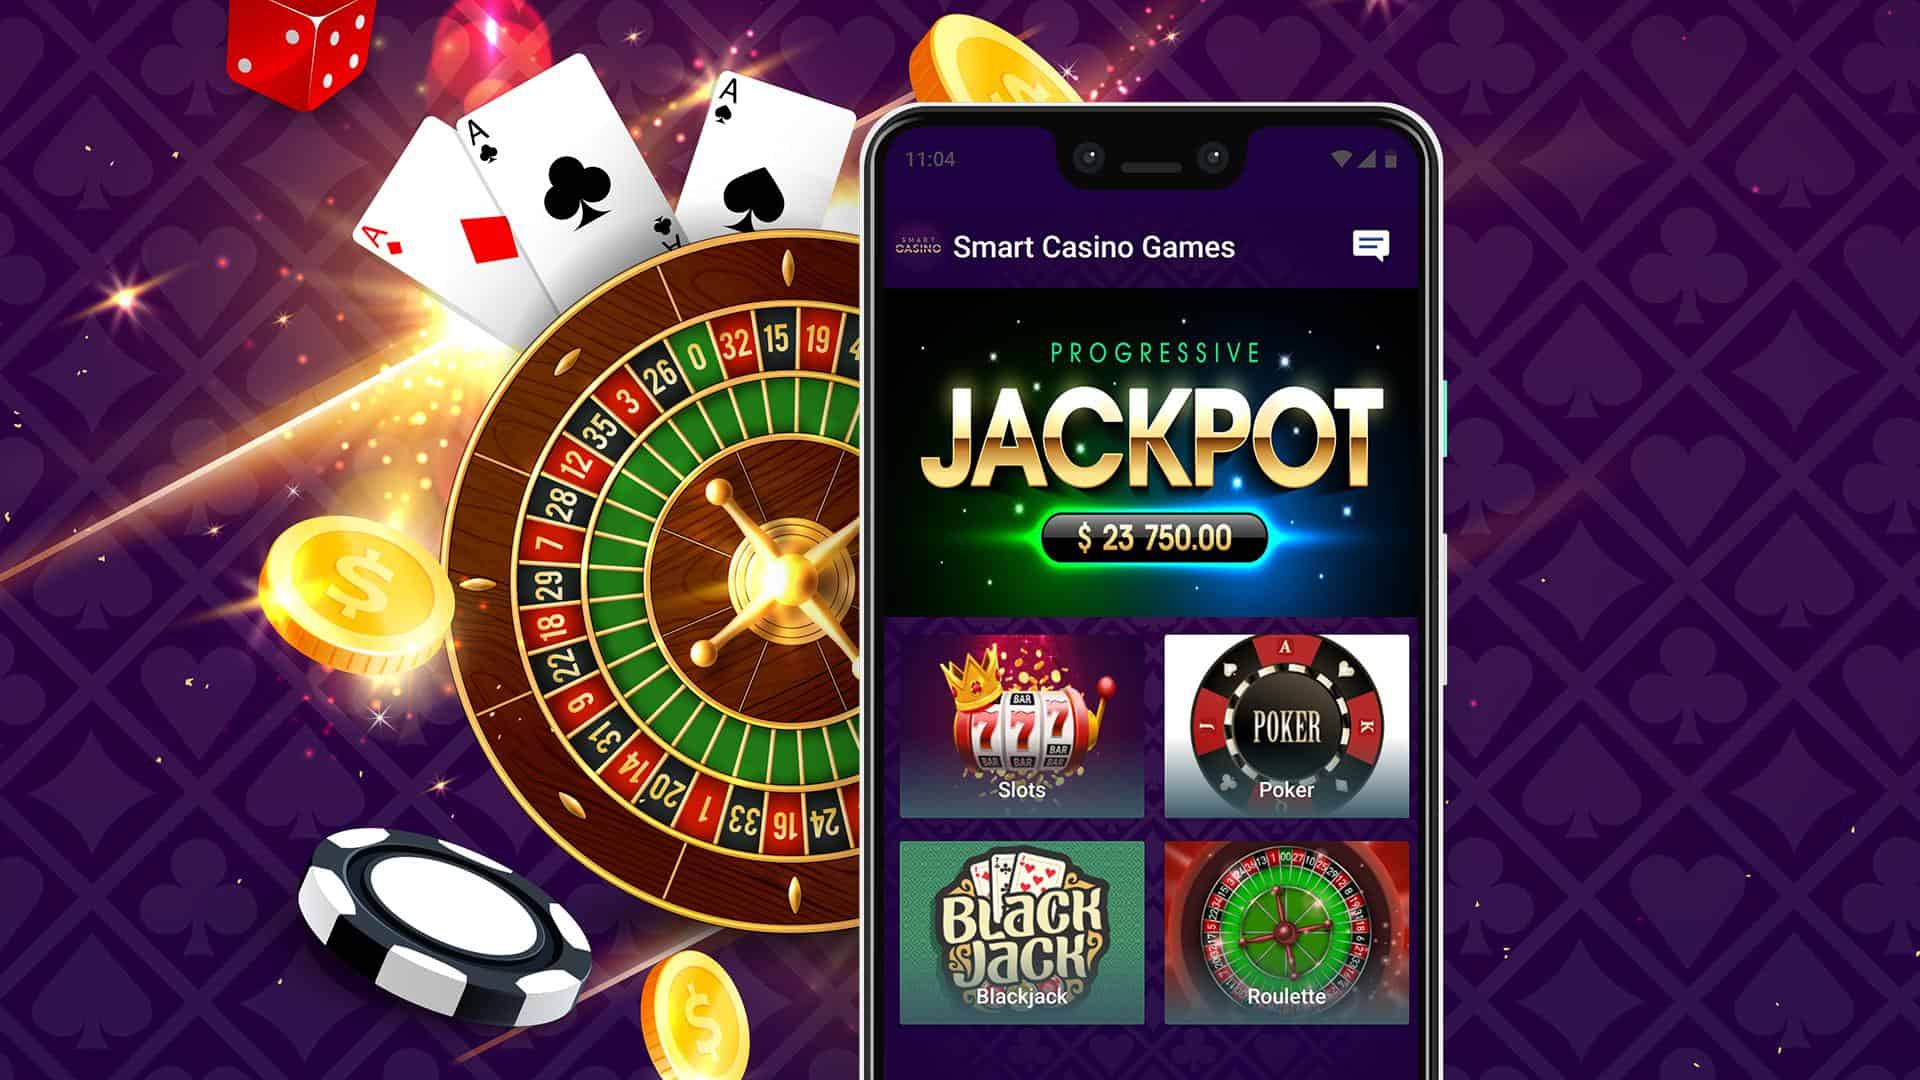 What is the smartest game to play at a casino?